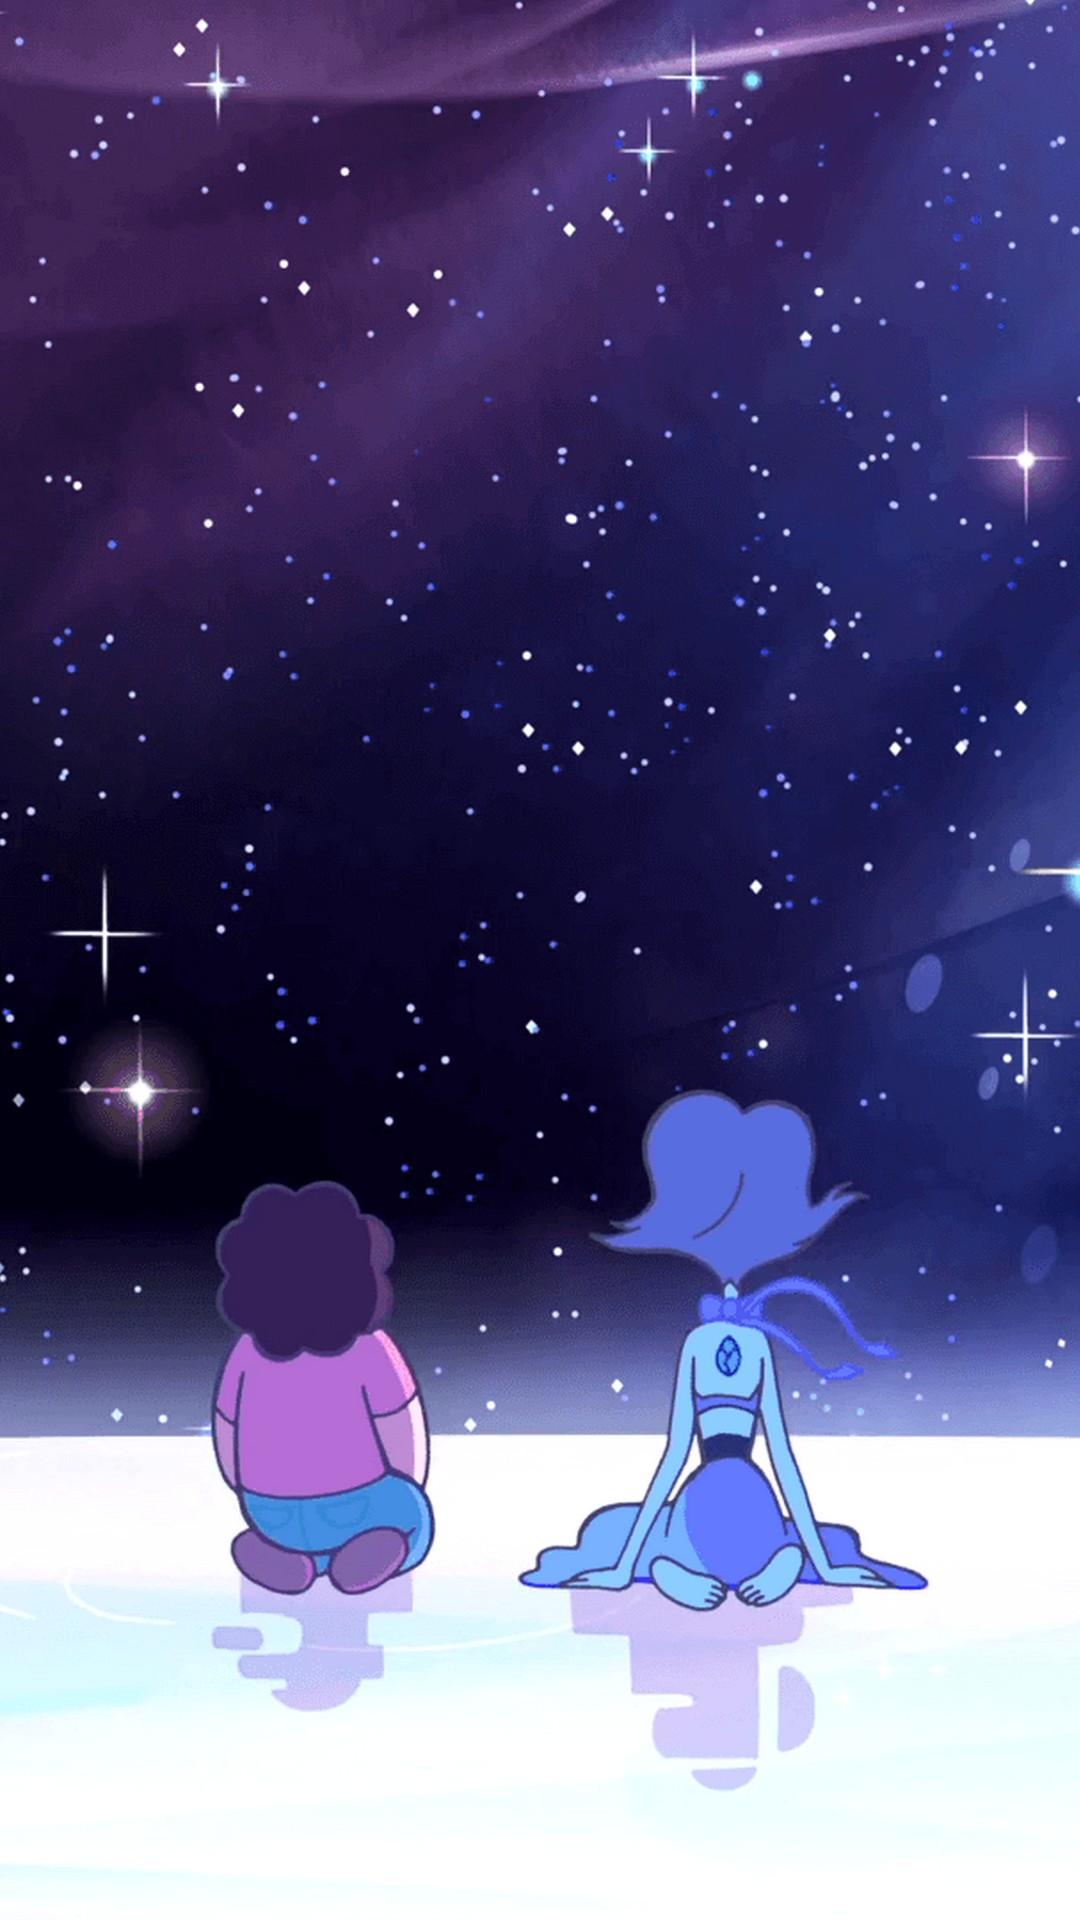 Steven Universe The Movie Wallpaper for iPhone 3D